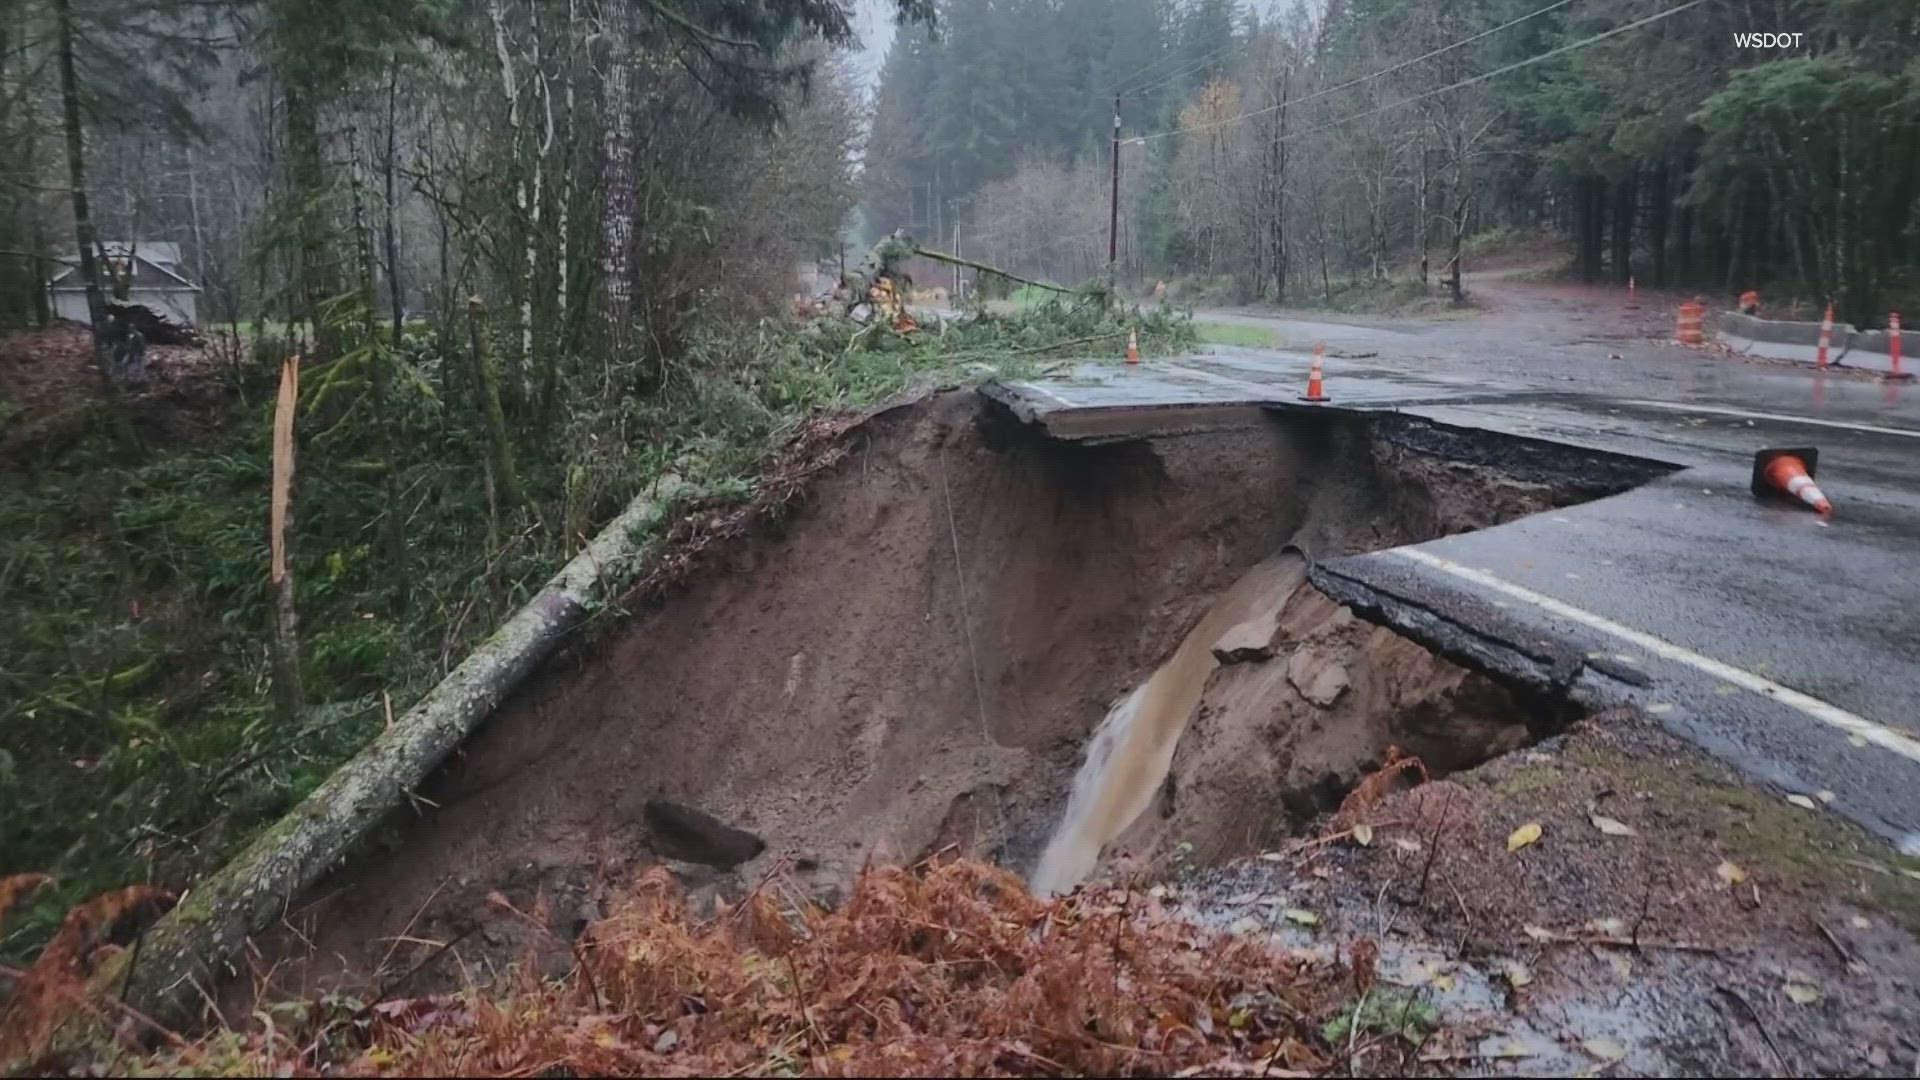 Amtrak service between Portland and Seattle has been suspended due to a landslide, while many Clark County roads remain closed.